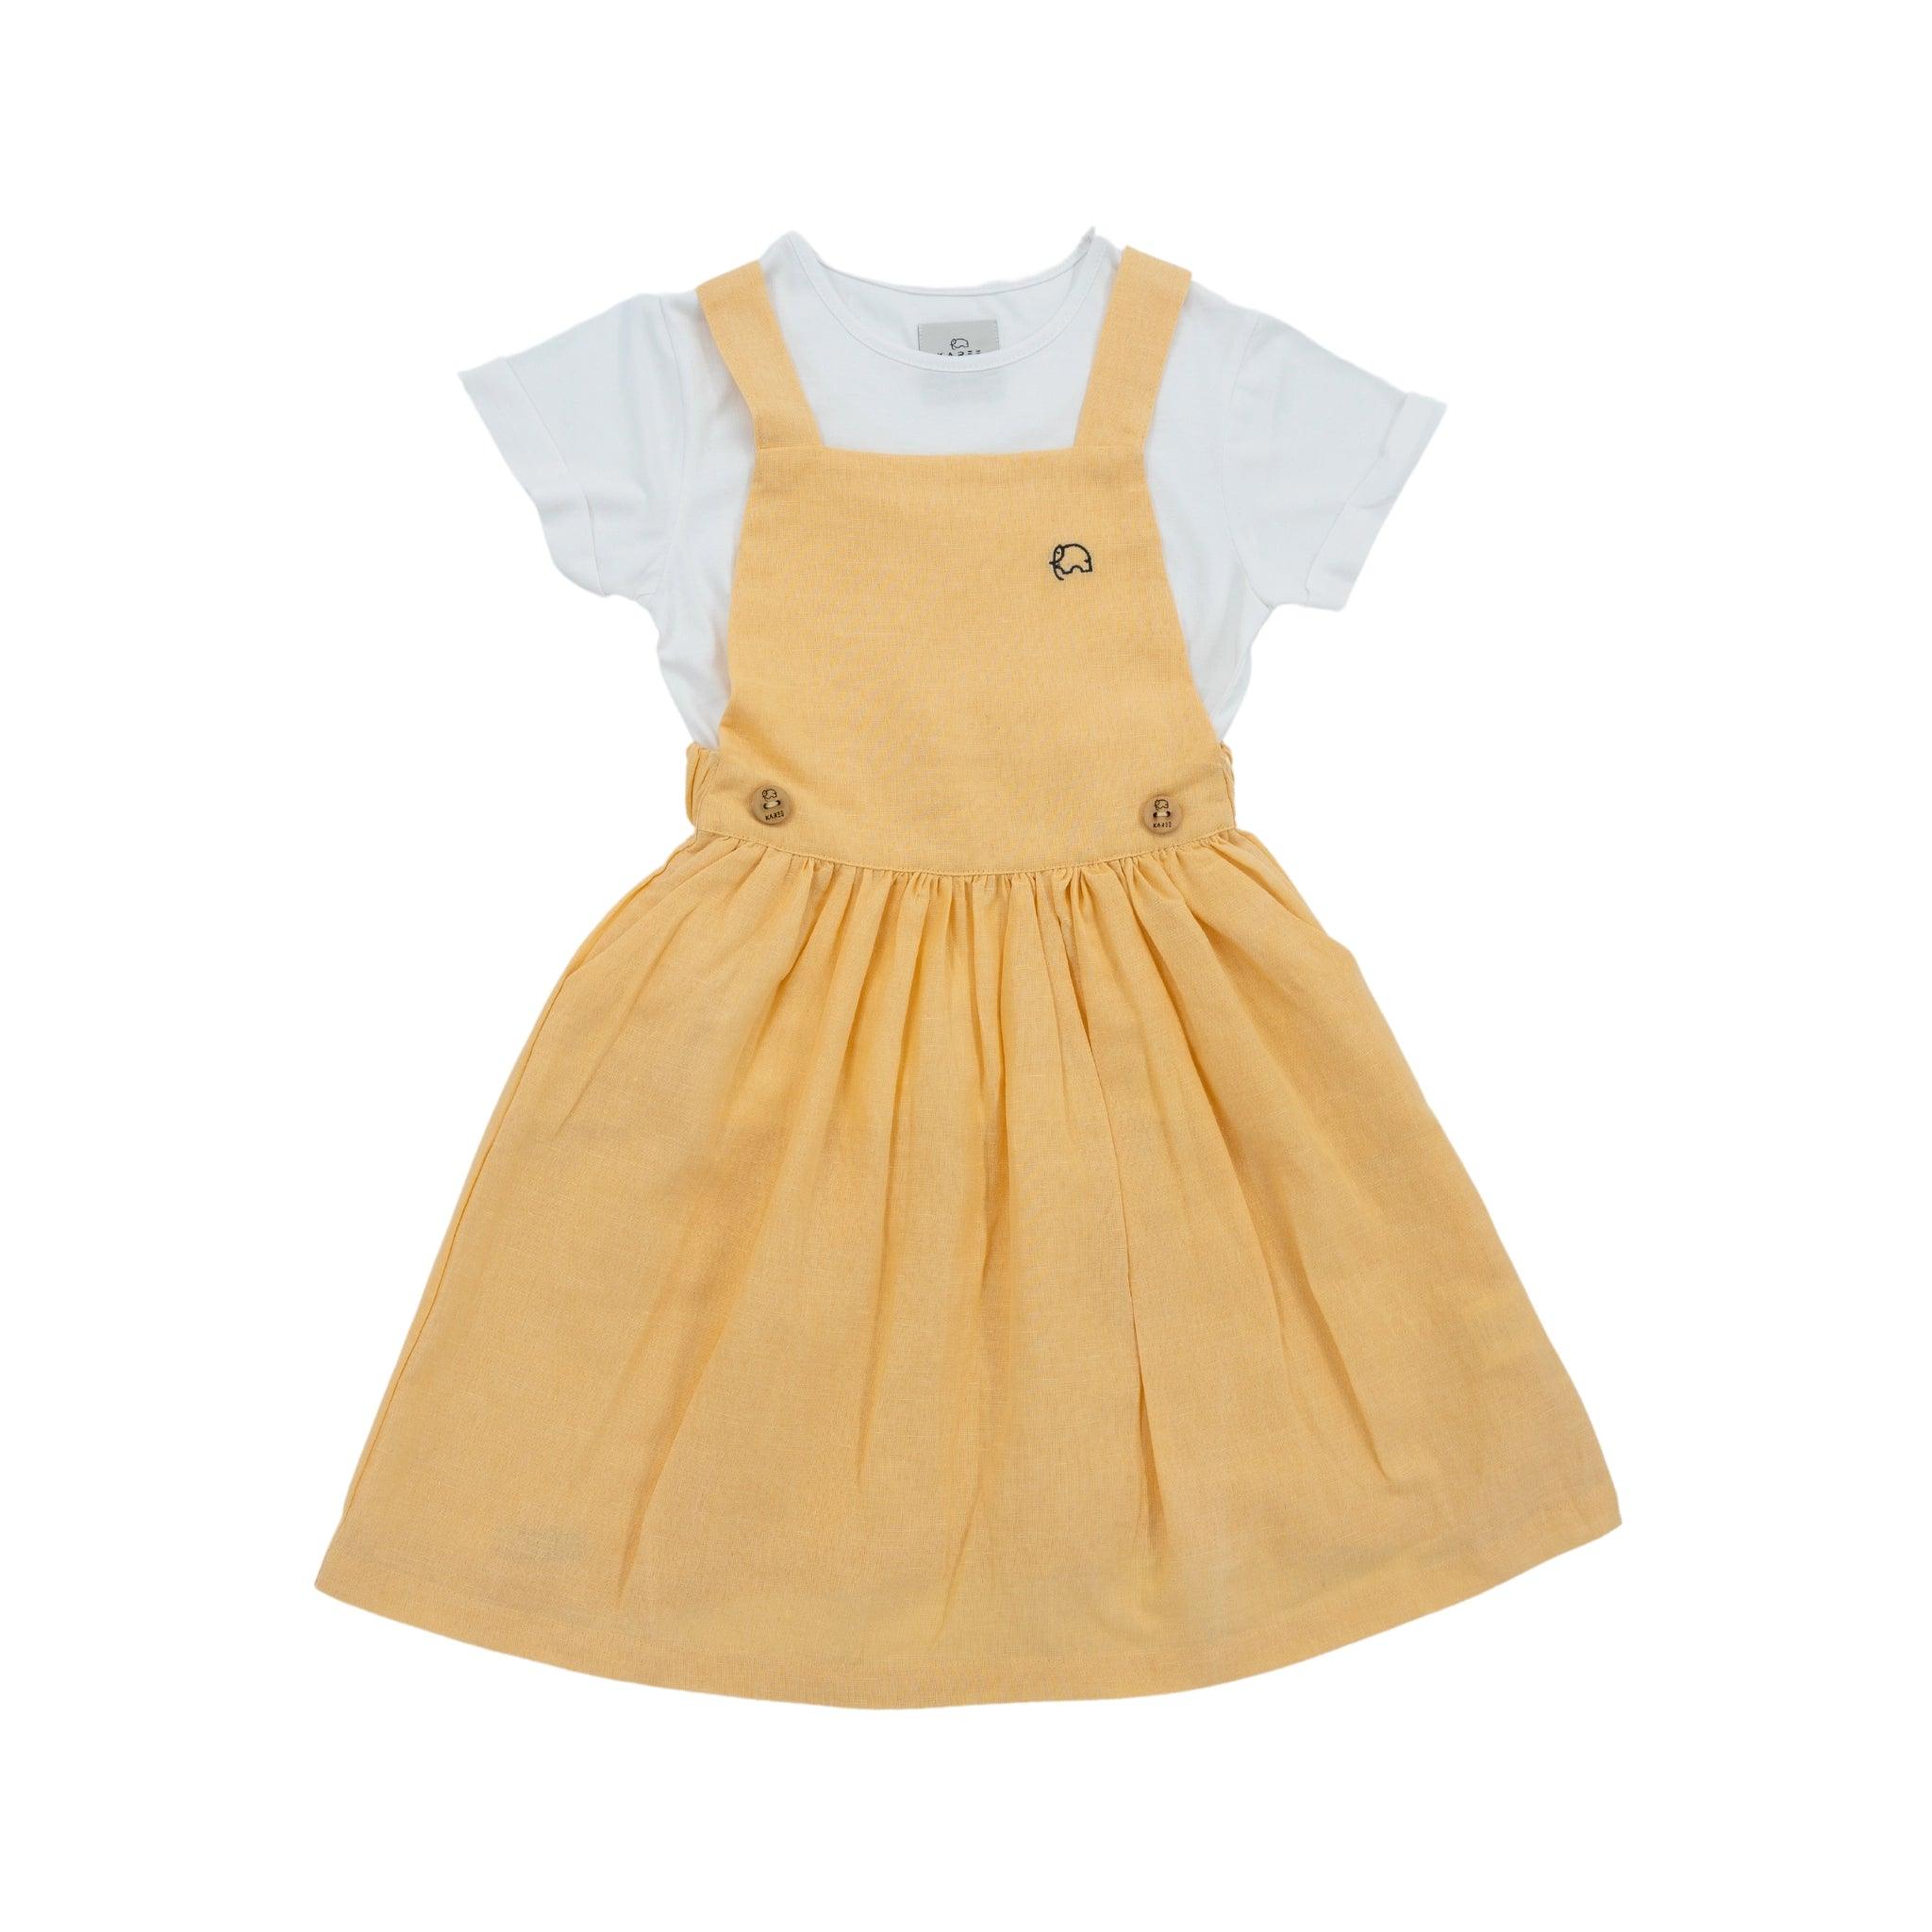 A yellow toddler Golden Fleece Linen Pinafore dress made from premium linen cotton, paired with a white t-shirt, displayed on a white background by Karee.